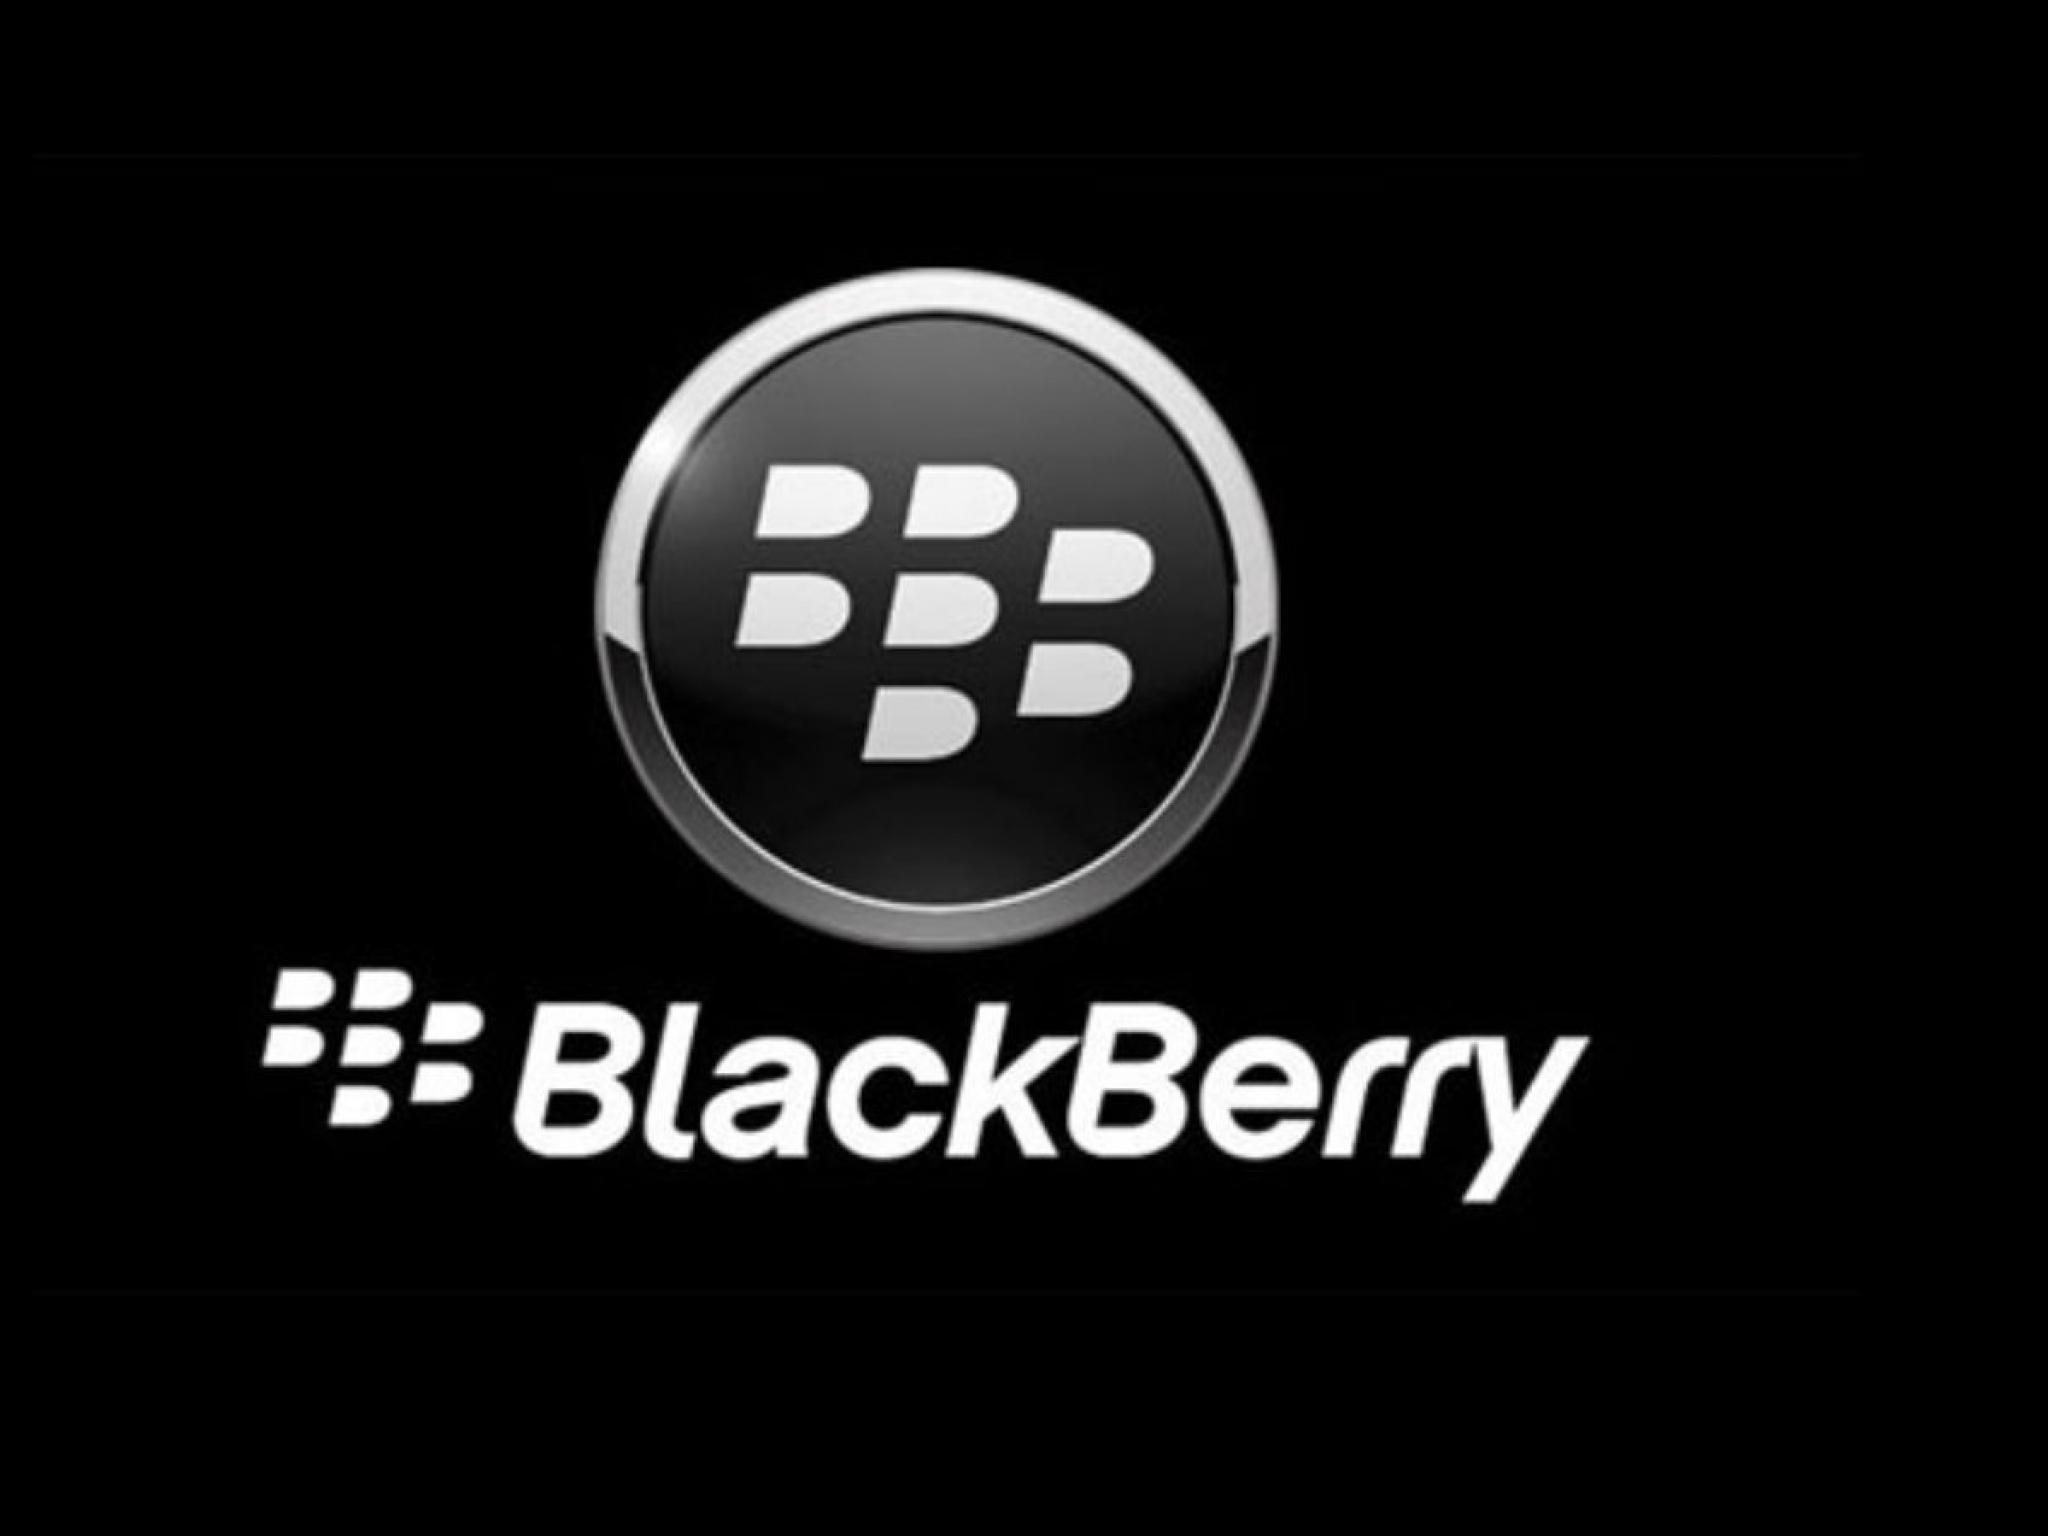 BlackBerry Gears Up For Q4 Print; These Most Accurate Analysts Revise Forecasts Ahead Of Earnings Call